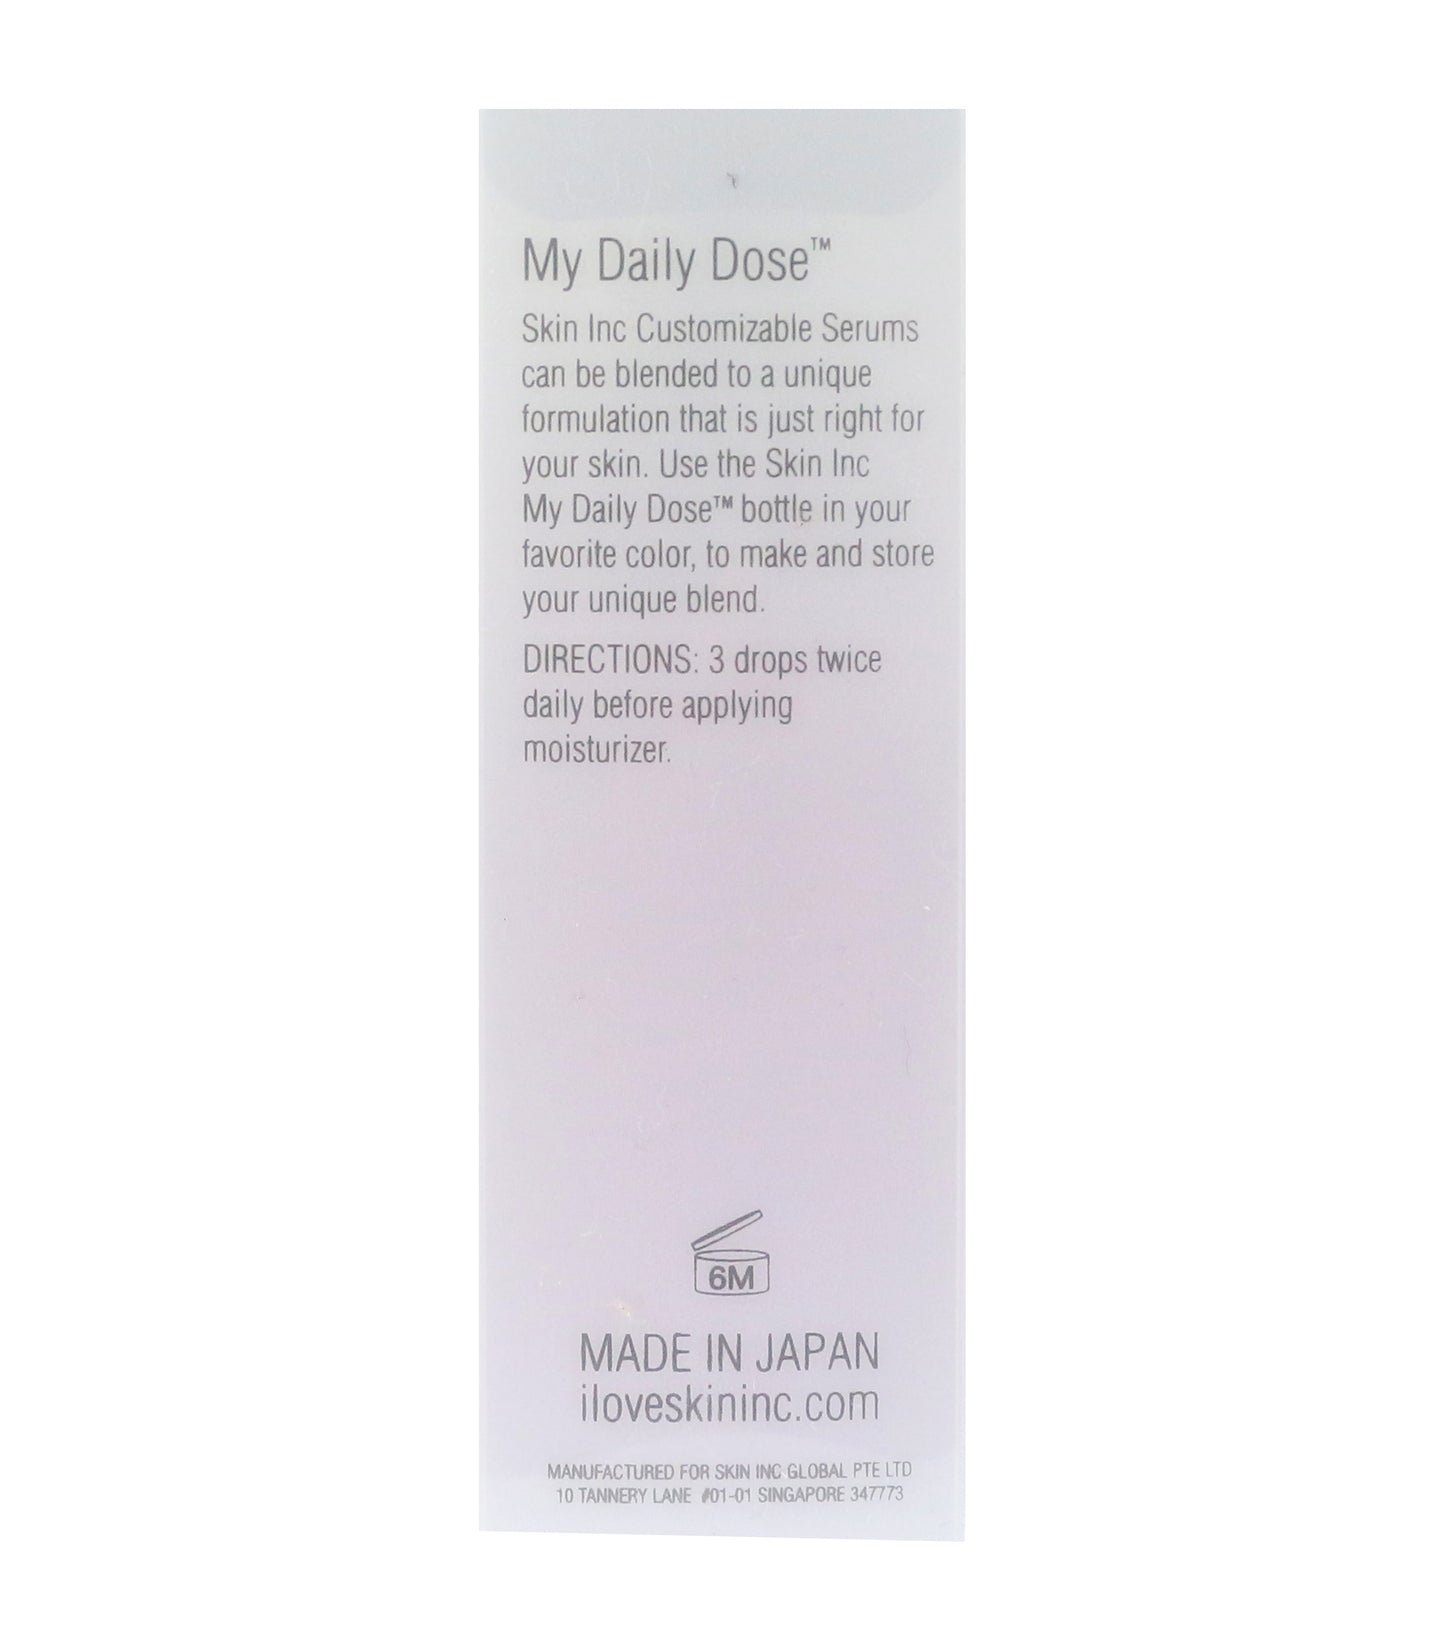 Skin Inc My Daily Dose Mixer Bottle 1oz/30ml New In Box